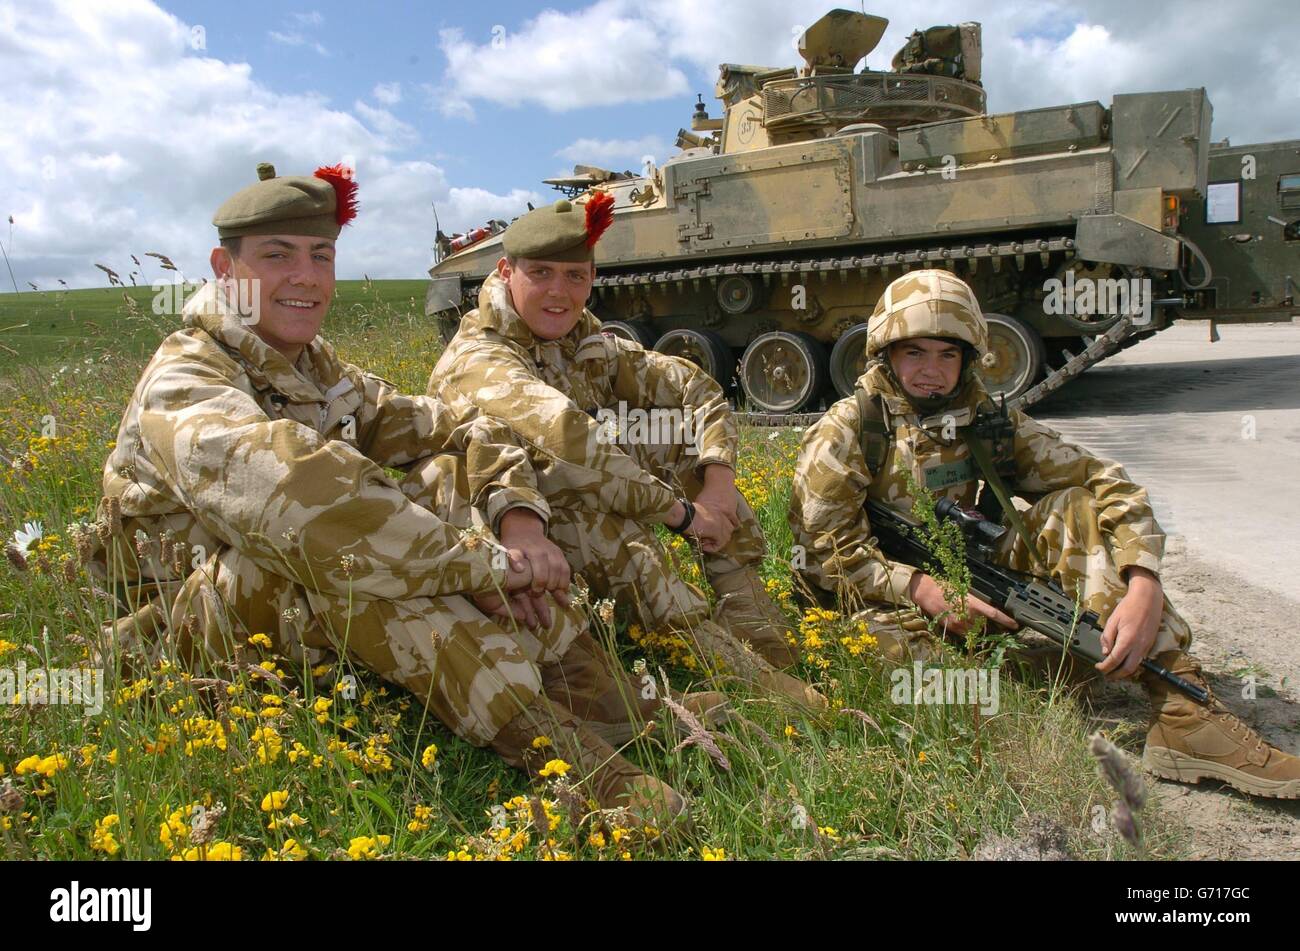 The Lowe family (from left): Paul, Barry and Craig, from Fife, members of the 1st Battalion The Black Watch (Royal Highland Regiment), relax during a training exercise on Salisbury Plain, before the Battallion's deployment to southern Iraq later this month. Paul, 19, and Craig are brothers, and Barry, 22, from Fife, is their cousin. More than 500 soldiers were preparing for their deployment to the region issued with an 'unprecedented amount' of personnel equipment, according to Army chiefs. The Battalion, which played a crucial role in the capture of Basra last year and returned to their base Stock Photo